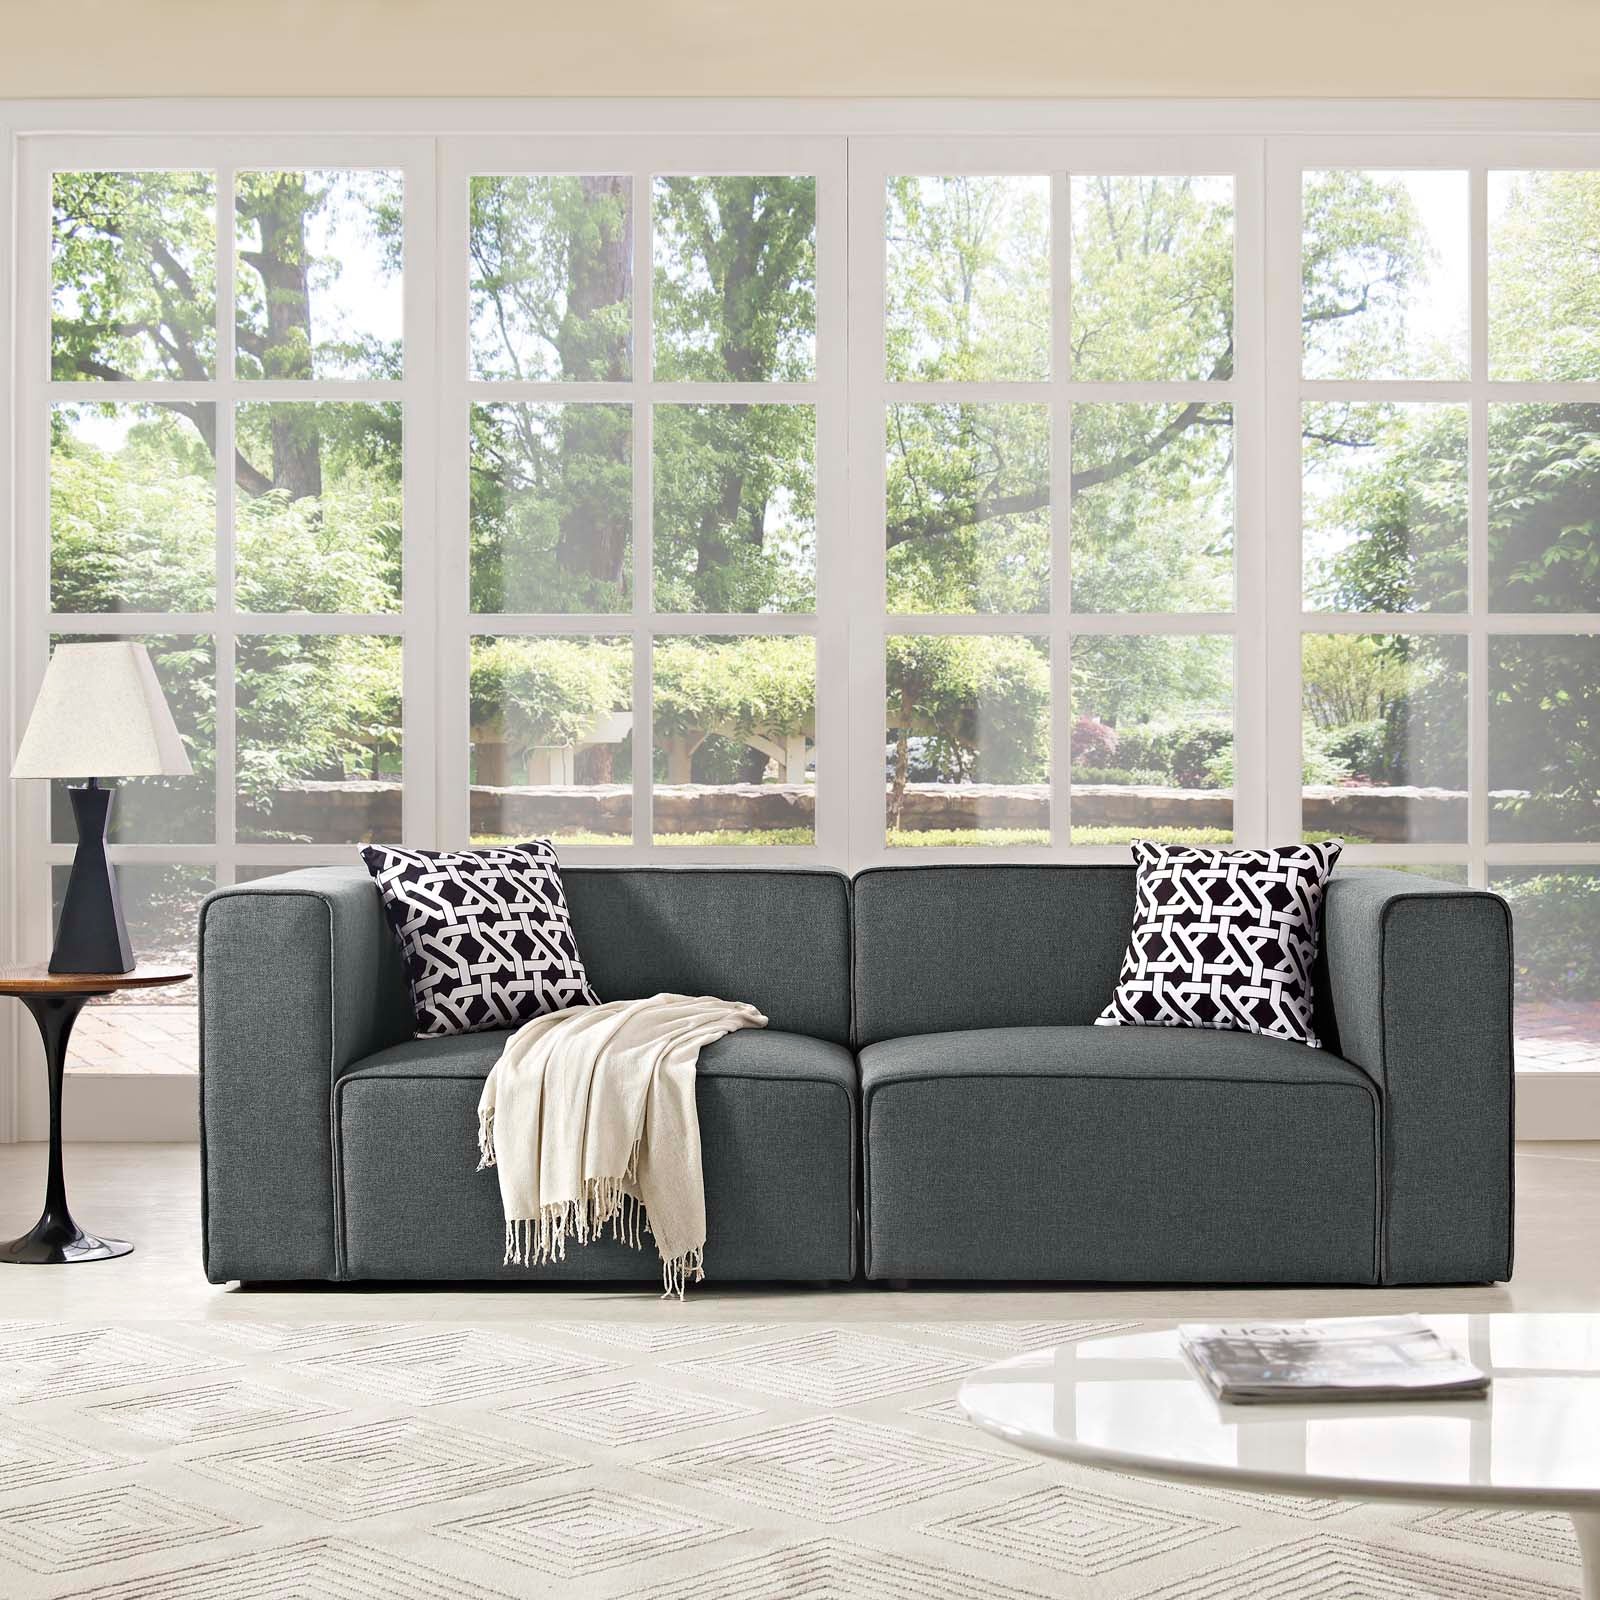 Modway Living Room Sets - Mingle 2 Piece Upholstered Fabric Sectional Sofa Set Gray